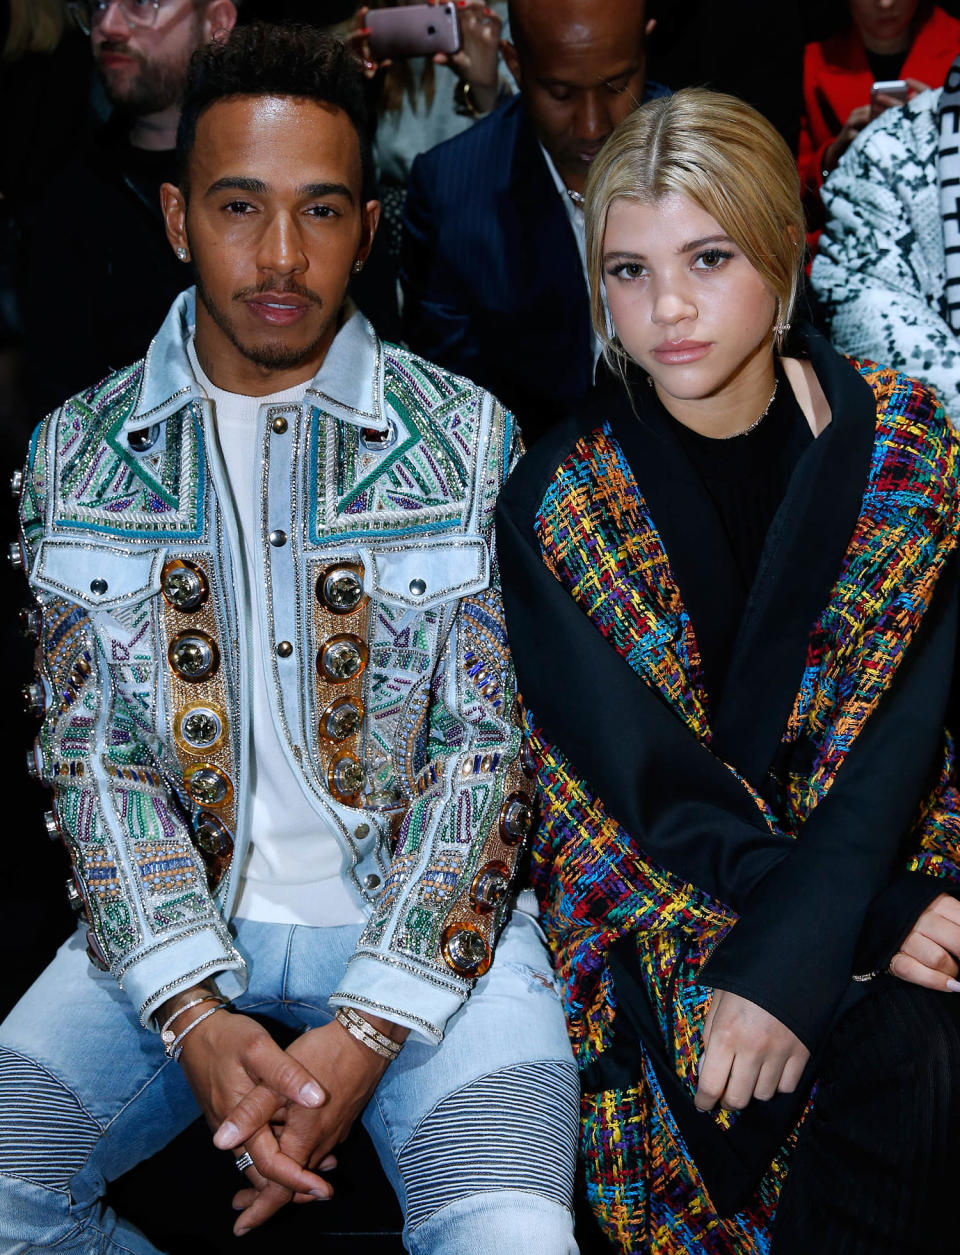 Lewis Hamilton and Sofia Richie in 2017. (Bertrand Rindoff Petroff / Getty Images)